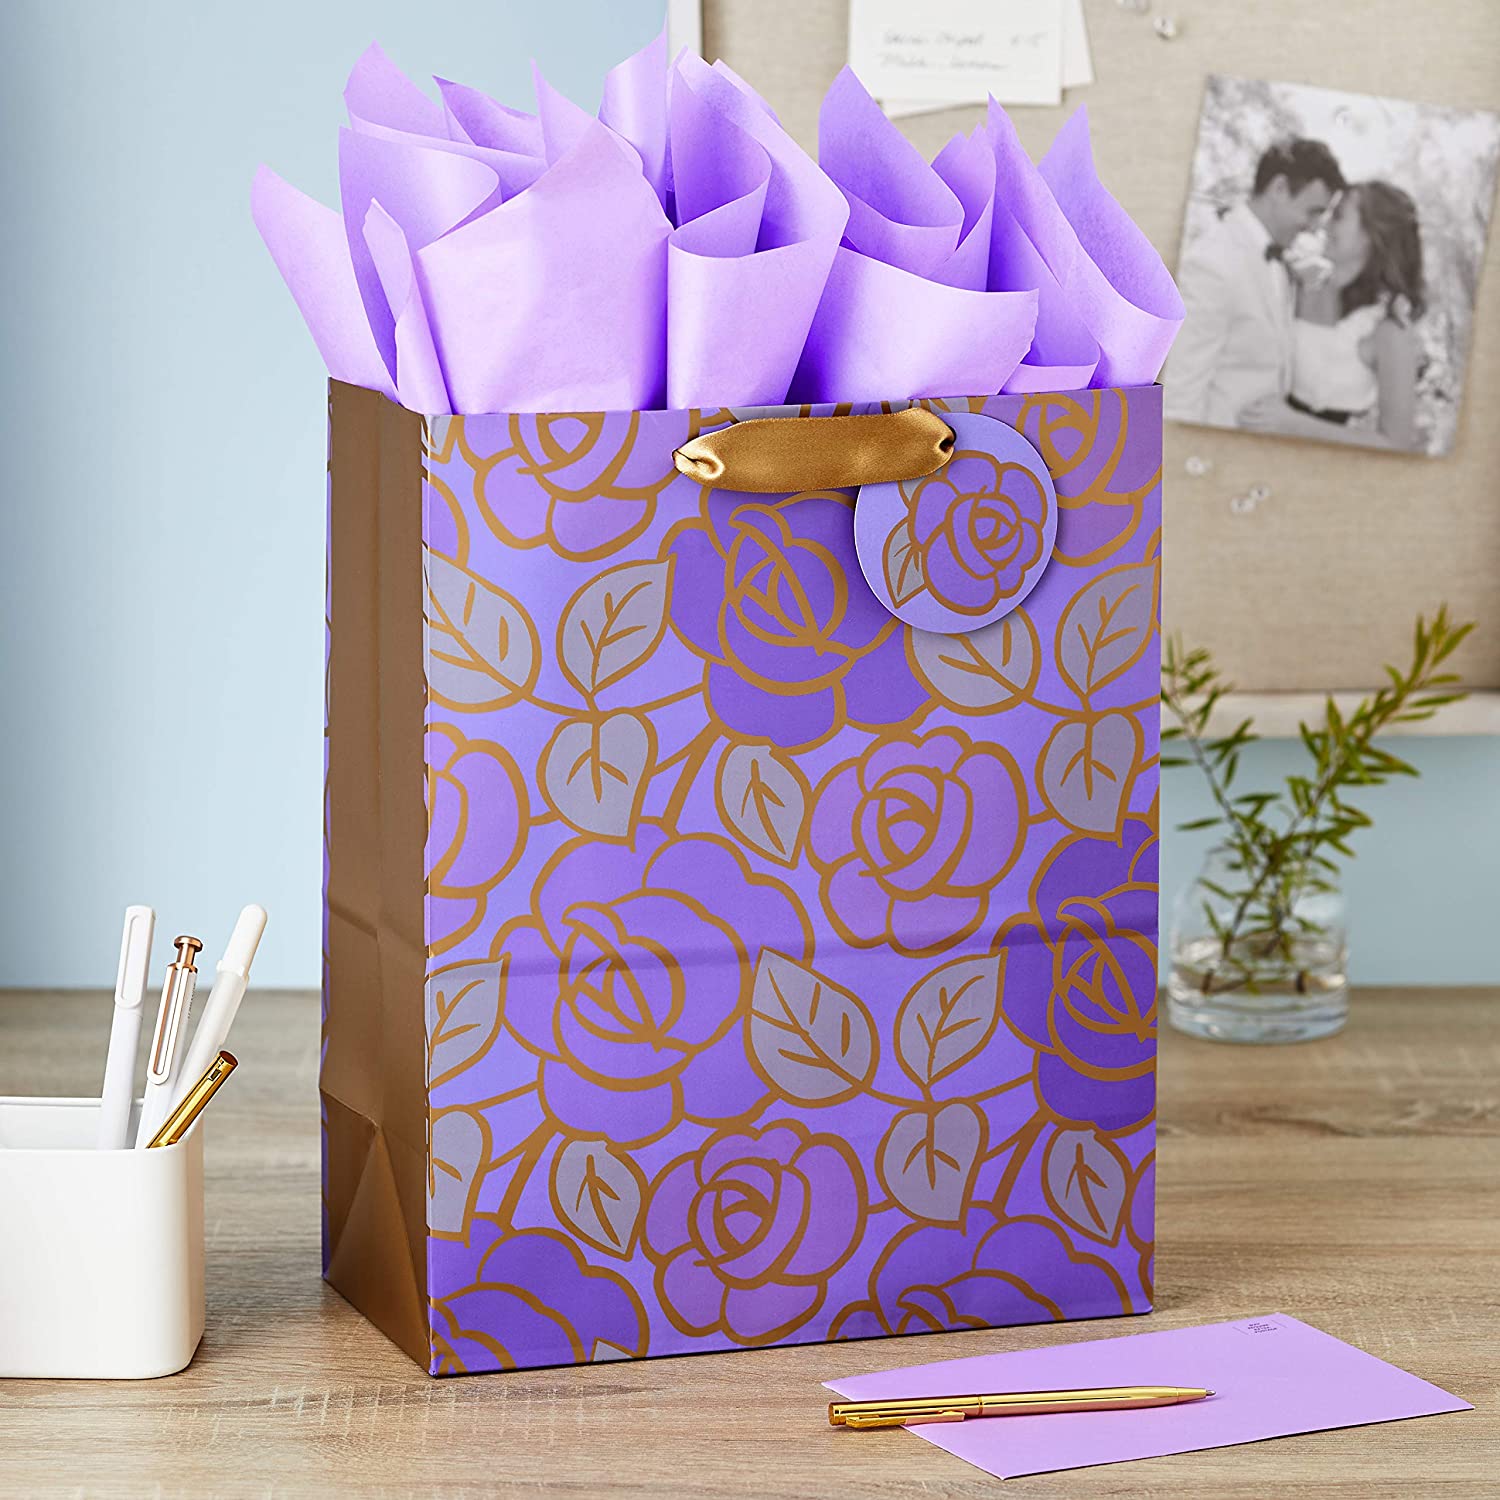 A Thoughtful Treat in an Adorable Mother’s Day Gift Bag!